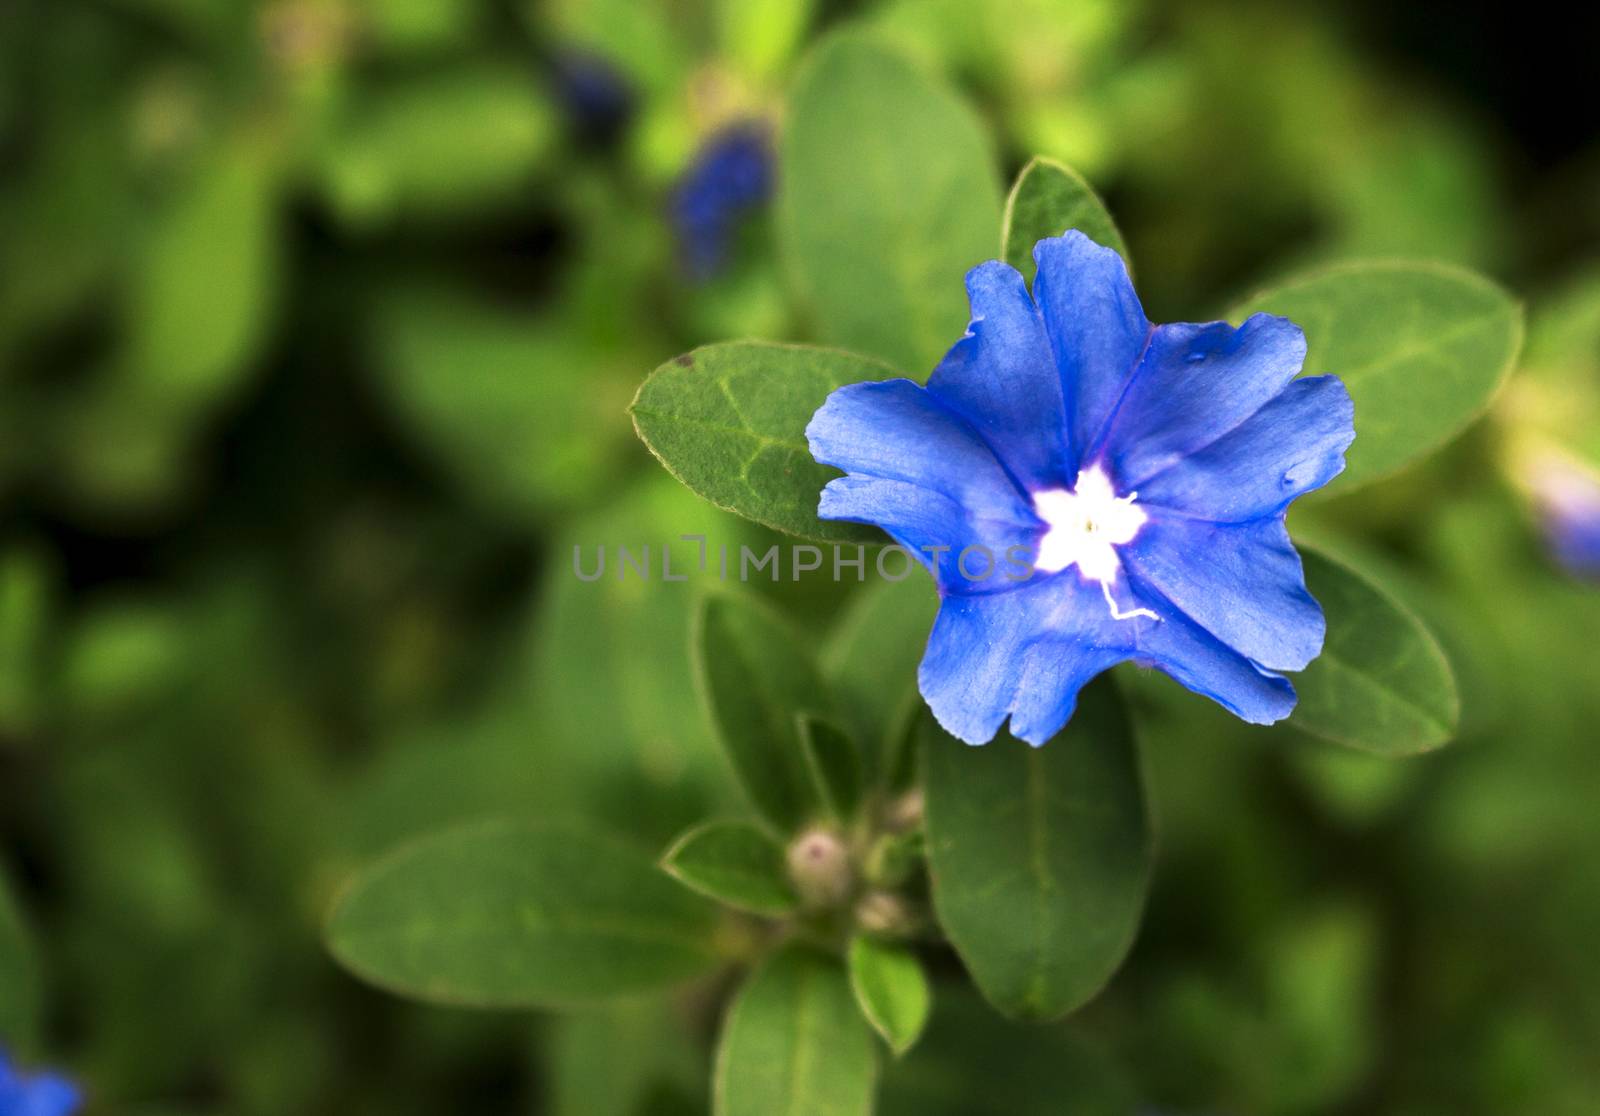 extreme close up of a stem of leaves and blue flower in garden